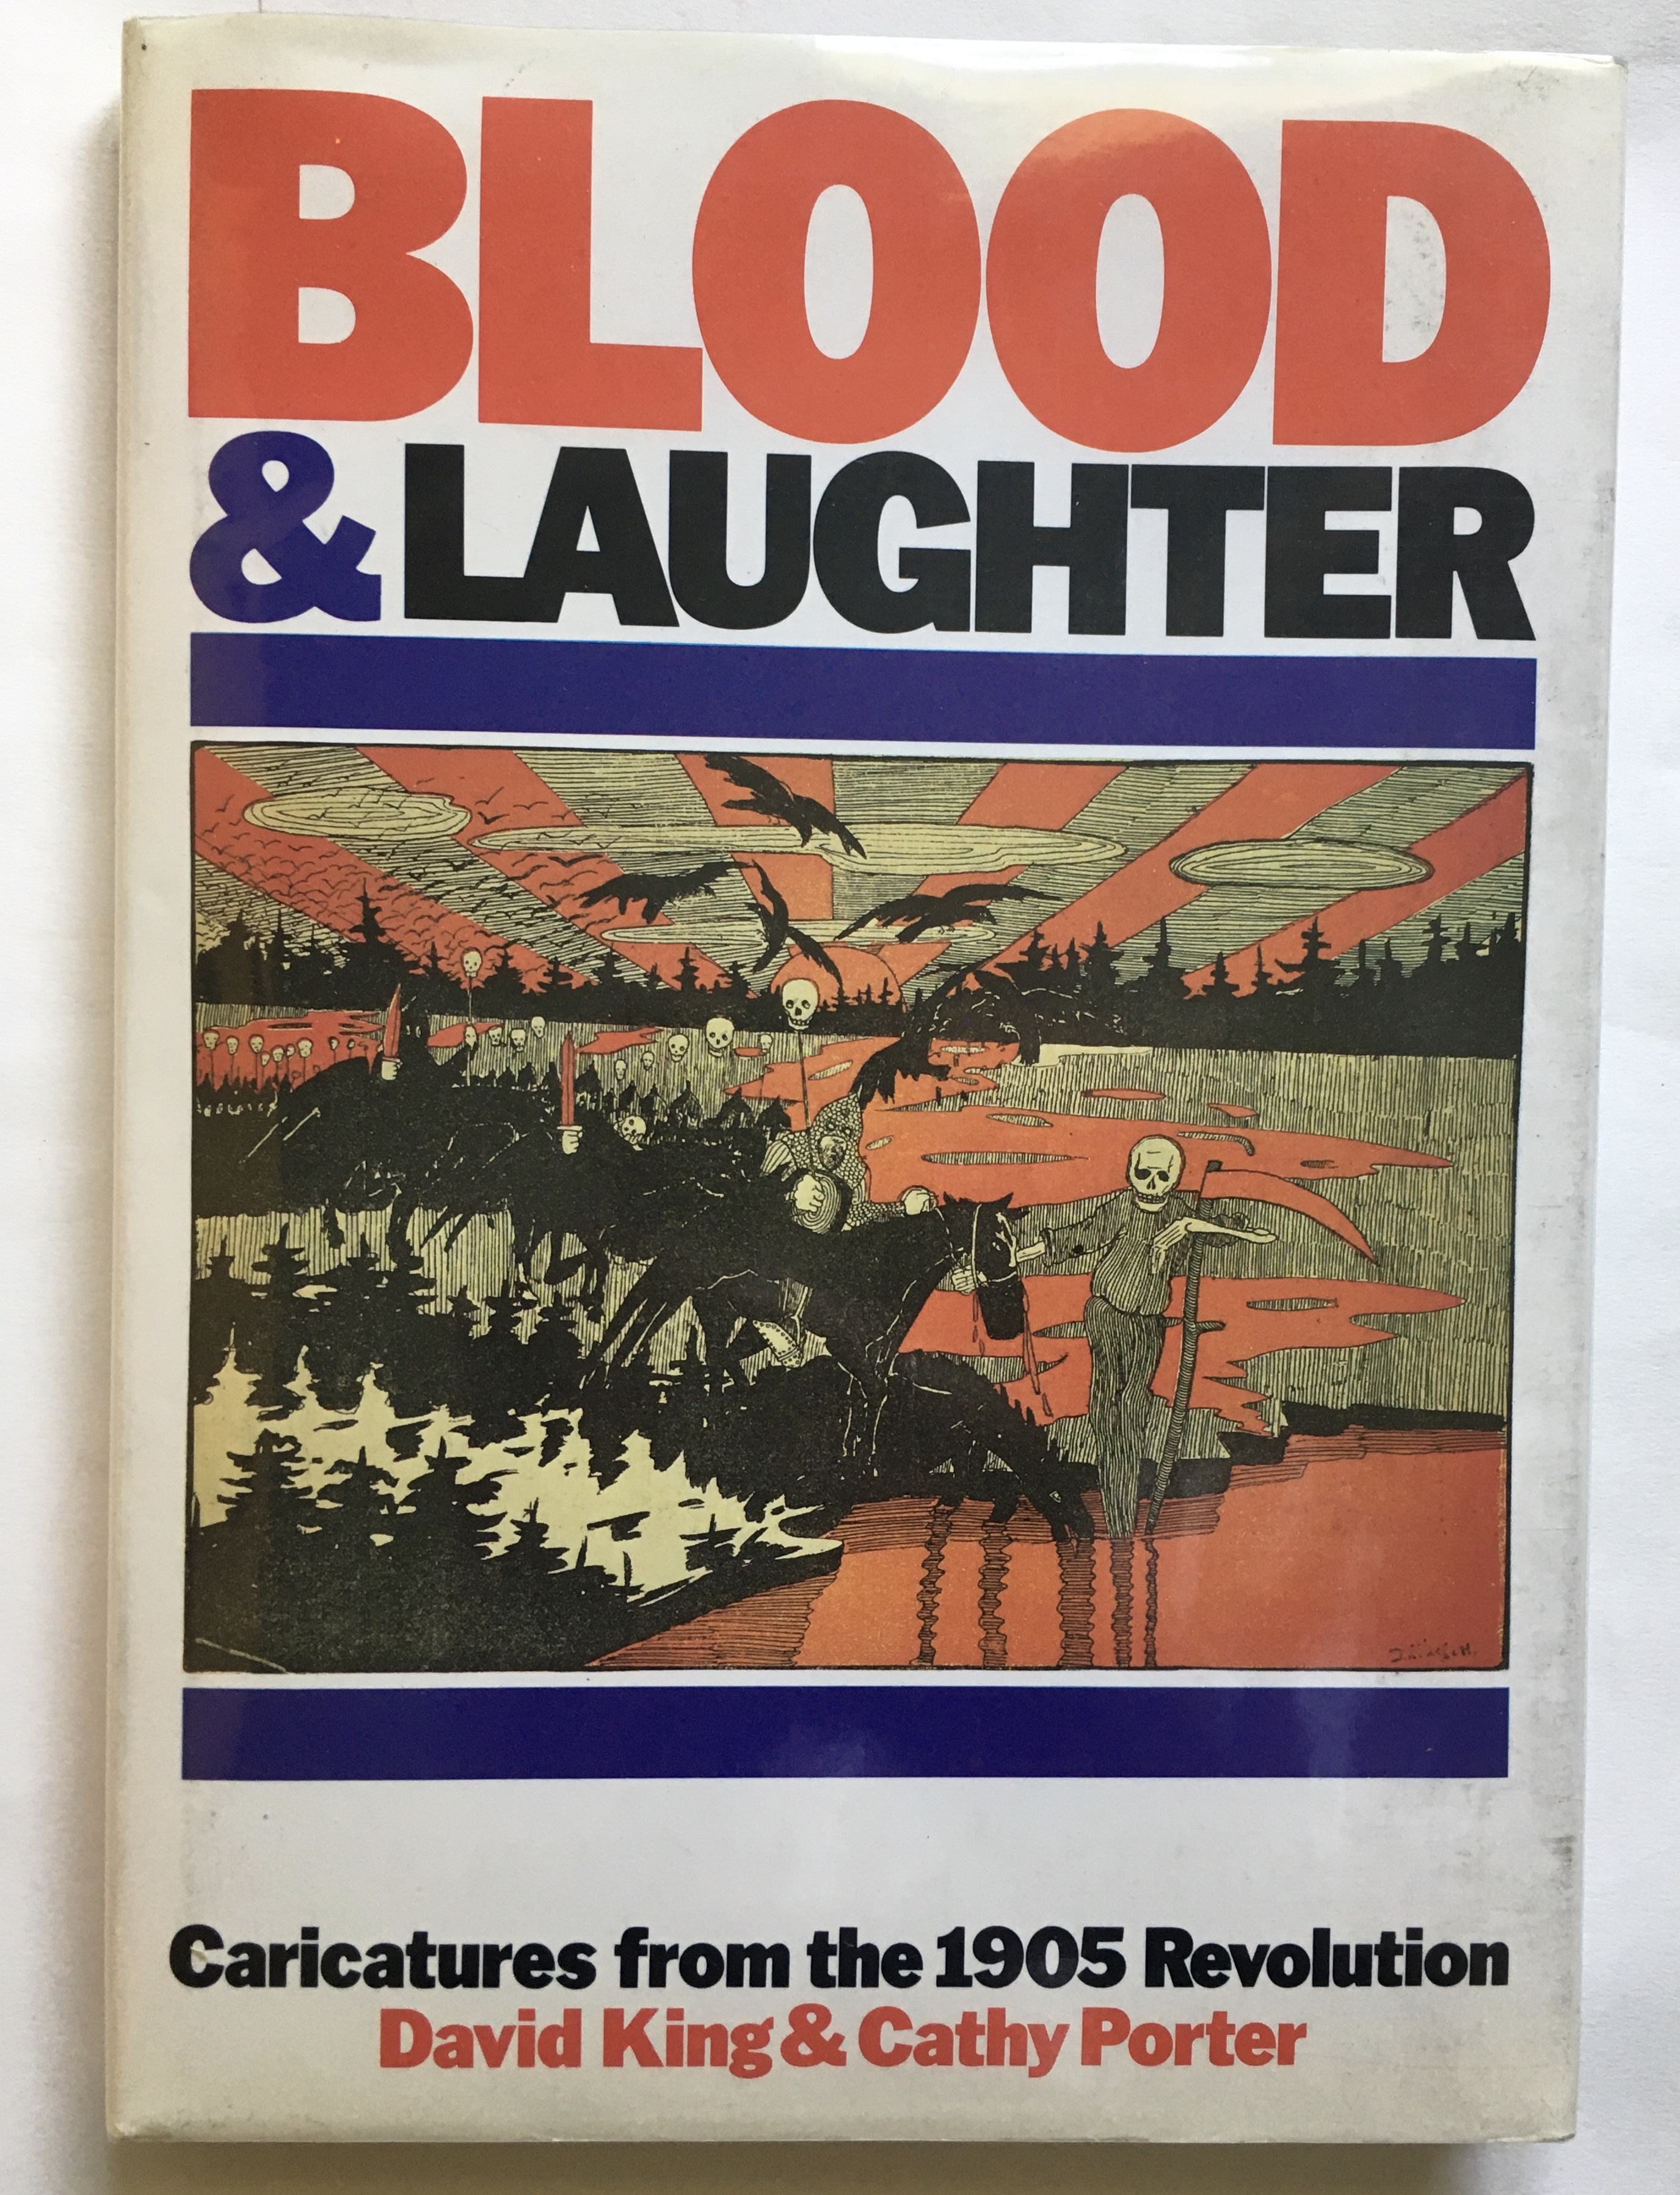 Blood and Laughter: Caricatures from the 1905 Revolution